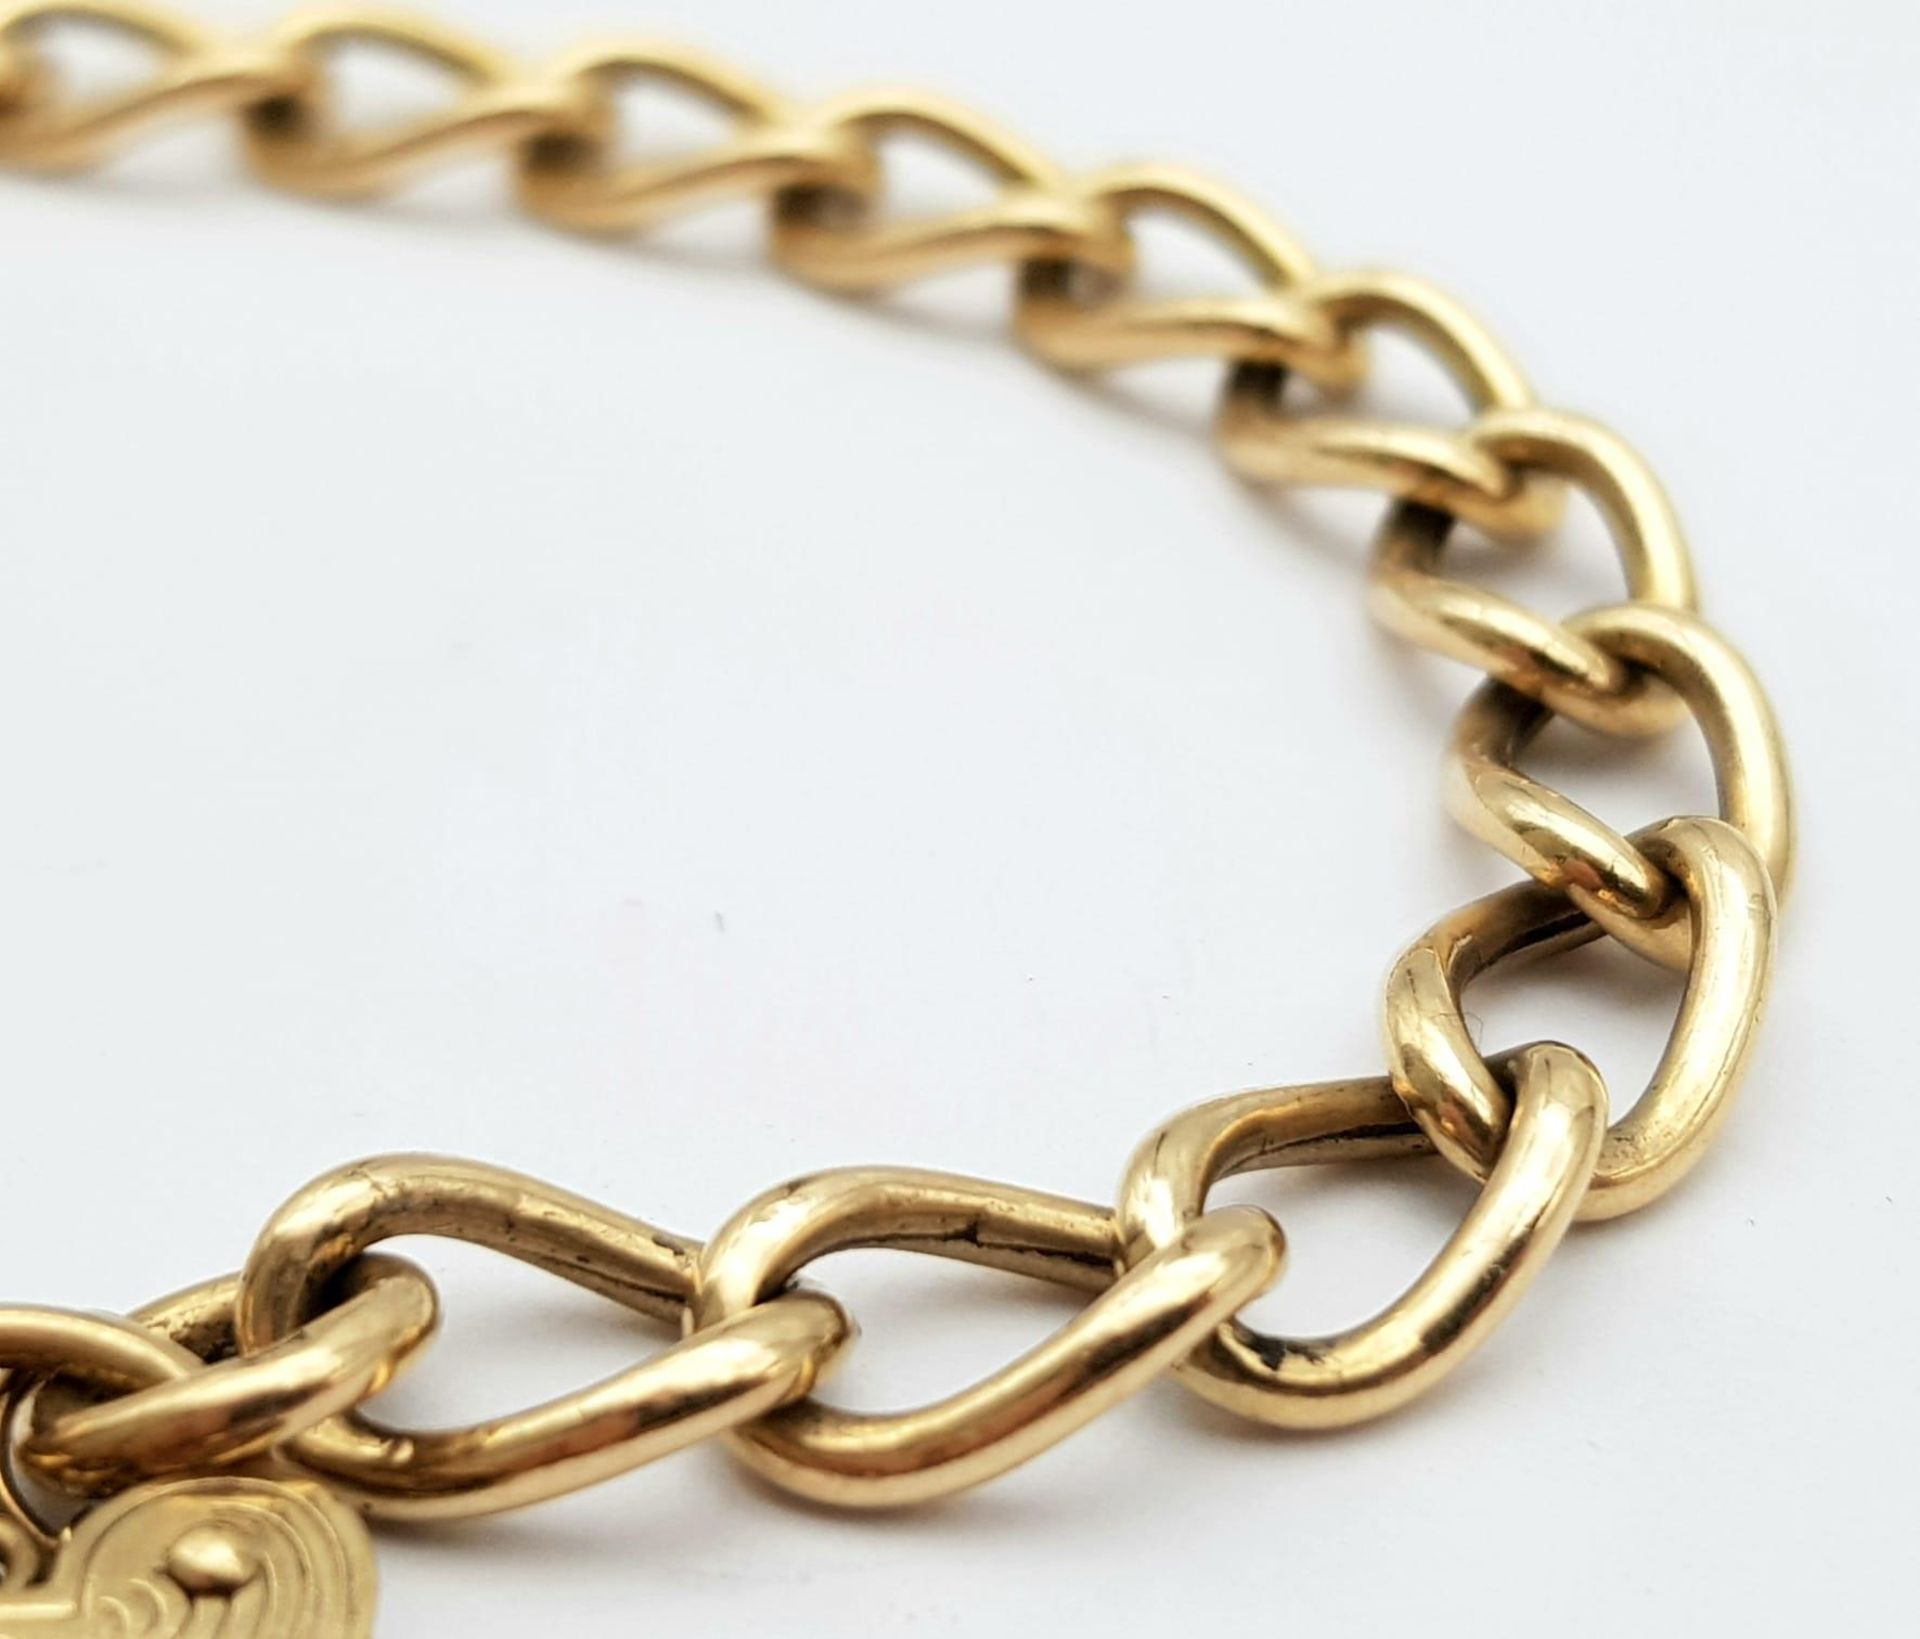 A Vintage 9K Yellow Gold Curb Link Bracelet with Heart Clasp. 18cm. 8.4g weight. - Bild 2 aus 4